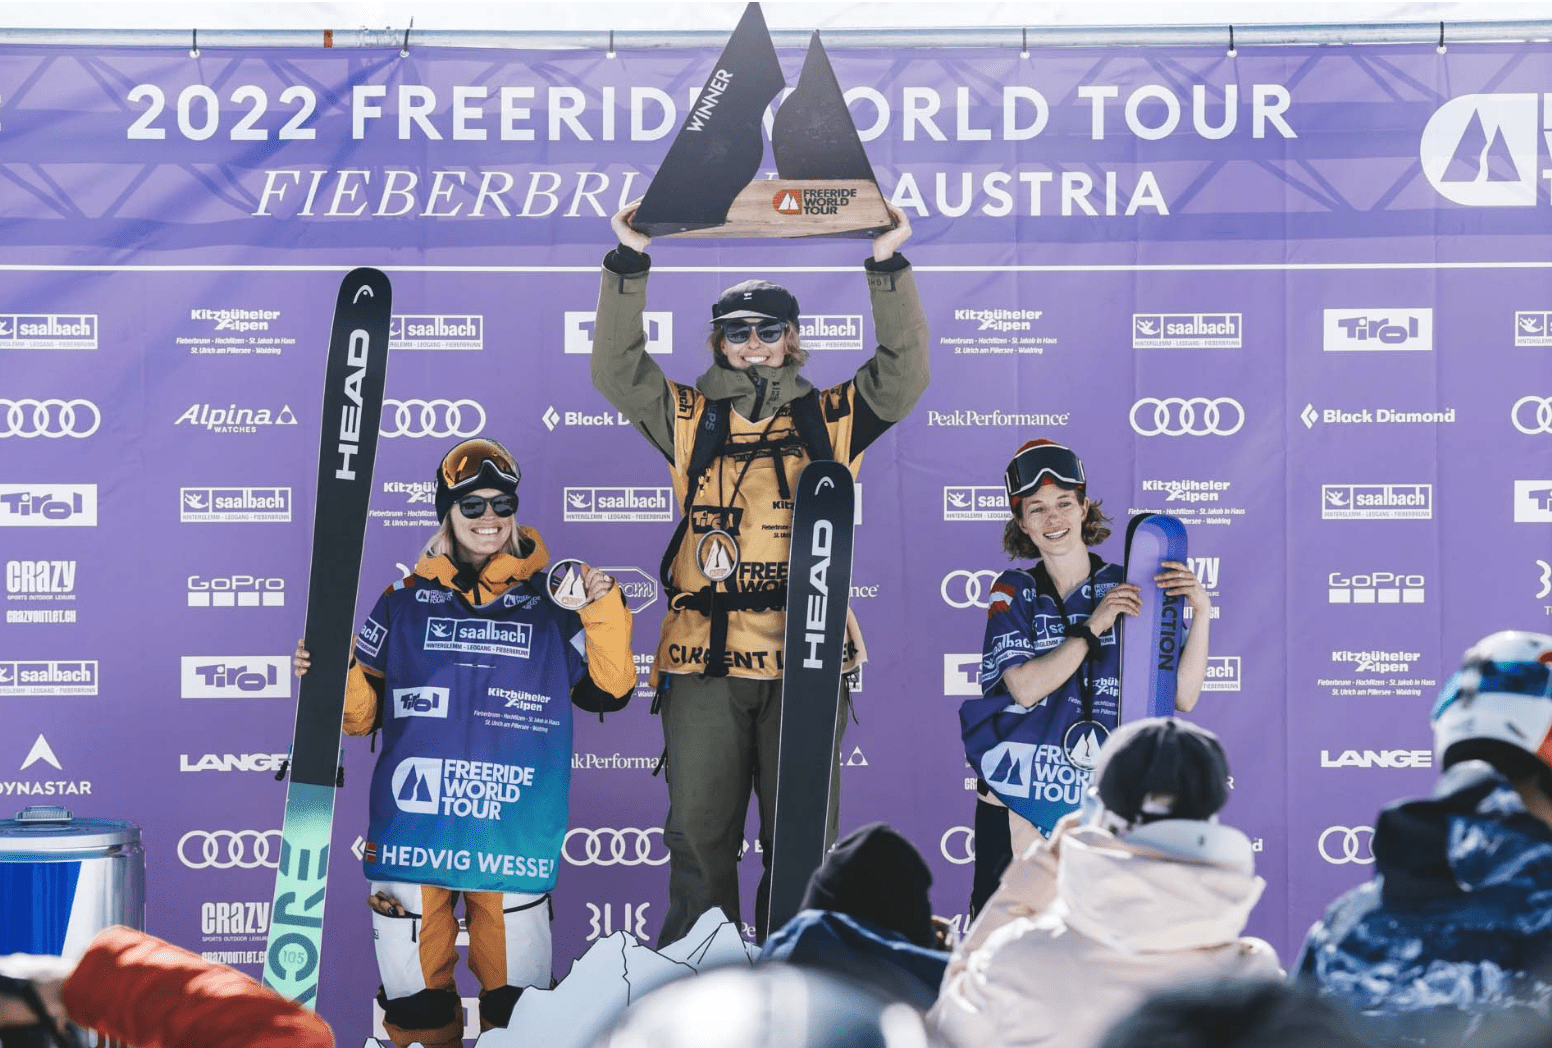 Jess Hotter - Kiwi Skier is Leading The Chase for the 2022 Freeride ...